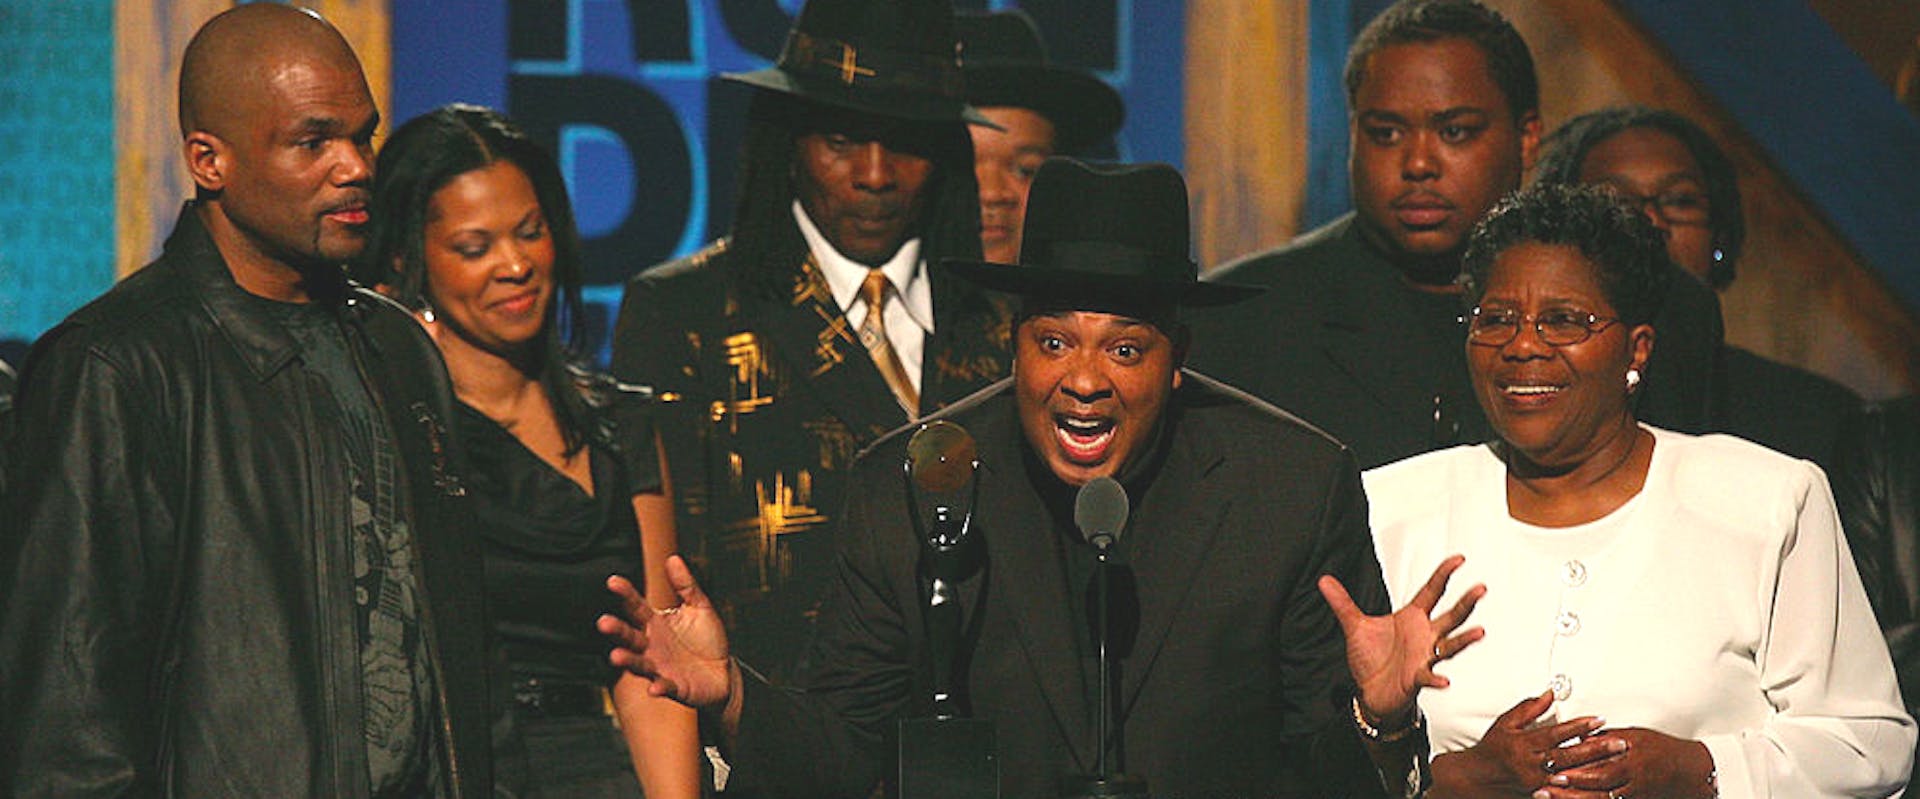 24th Annual Rock and Roll Hall of Fame Induction Ceremony - Show
CLEVELAND - APRIL 04: Jason "Rev. Run" Simmons speaks onstage as Run D.M.C. is inducted at the 24th Annual Rock and Roll Hall of Fame Induction Ceremony at Public Hall on April 4, 2009 in Cleveland, Ohio. 